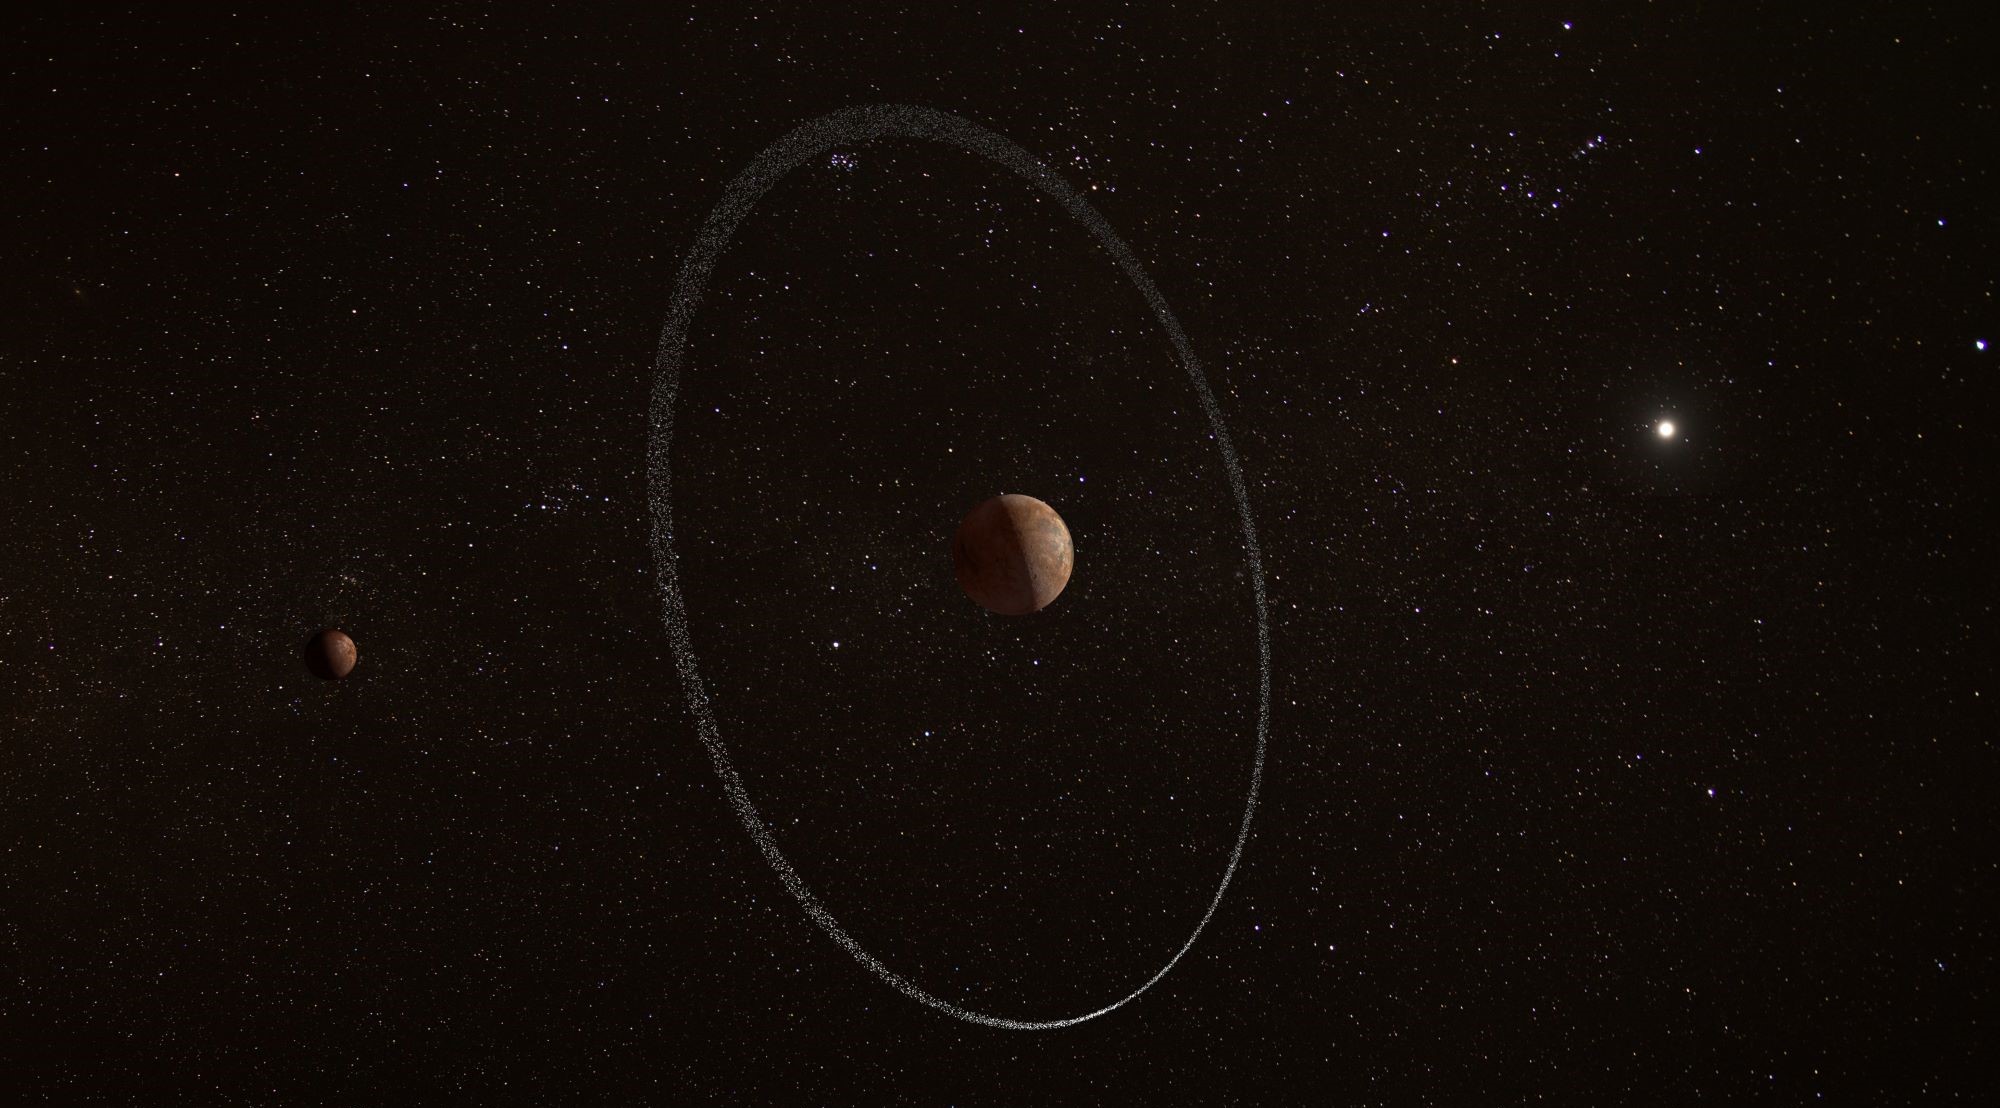 Distant dwarf planet Quaoar shouldn’t have a ring, but it does